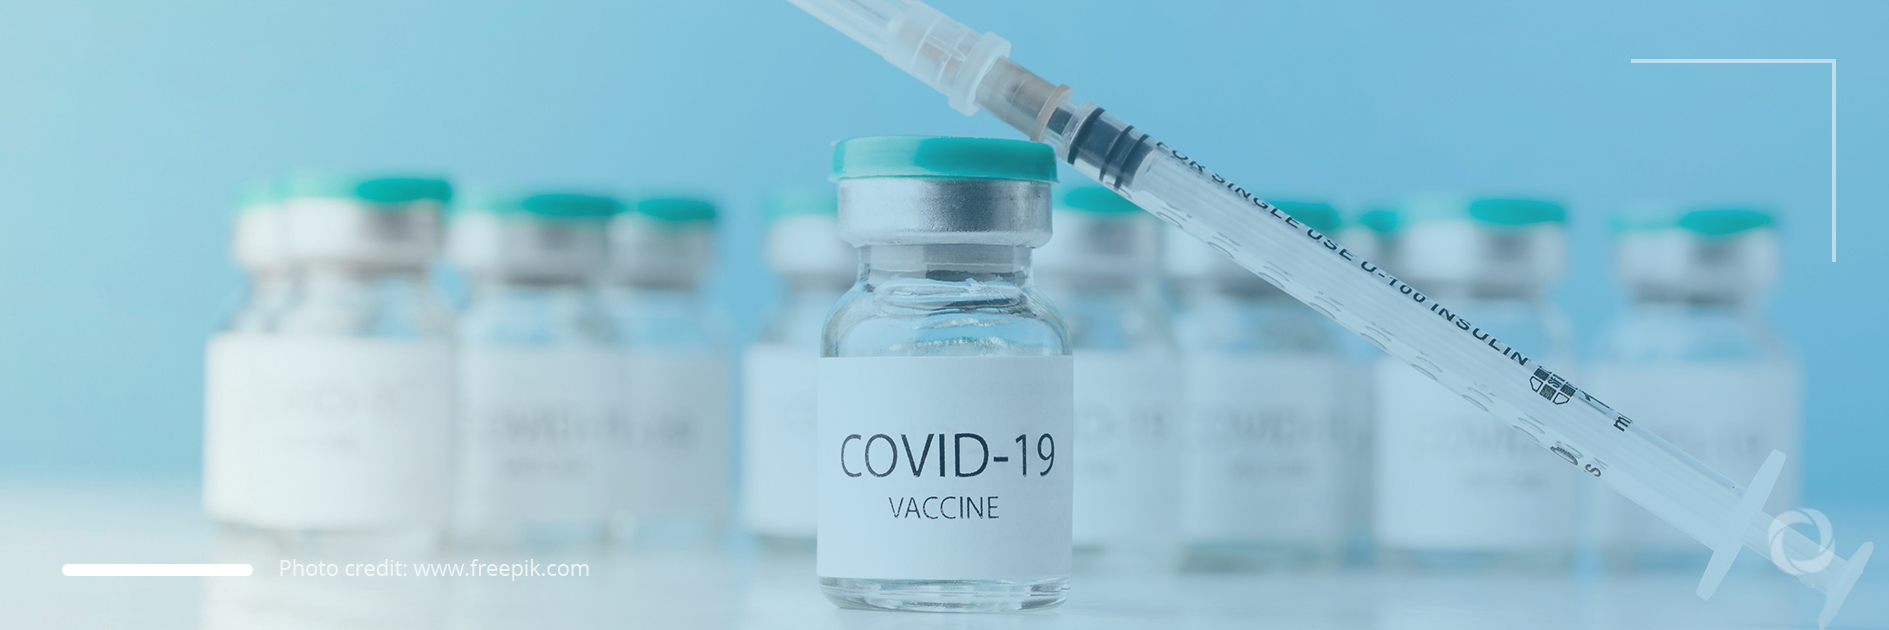 Nepal allocates US$230 million for the procurement of vaccines against COVID-19; scraps PAF